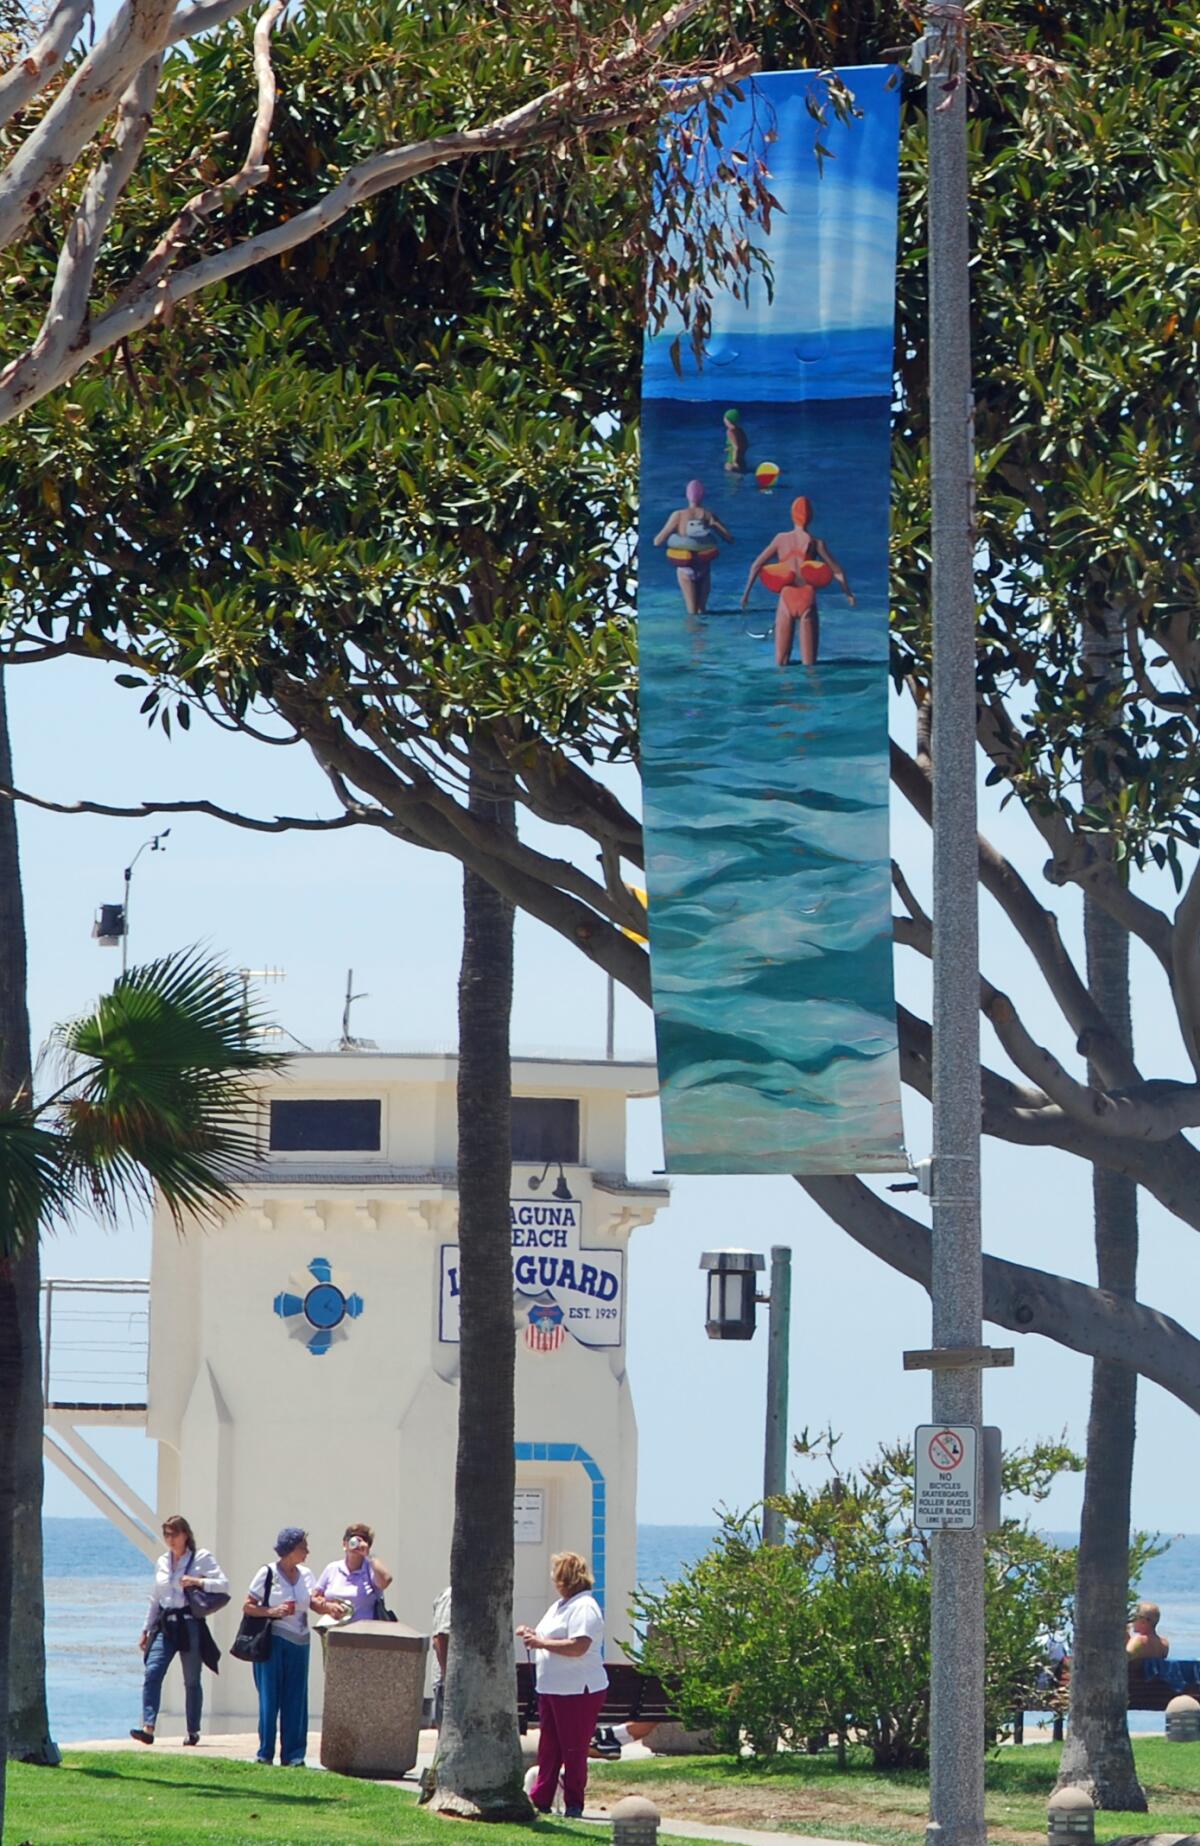 An artistic banner with sunbathers wading into the ocean hangs in Laguna Beach.